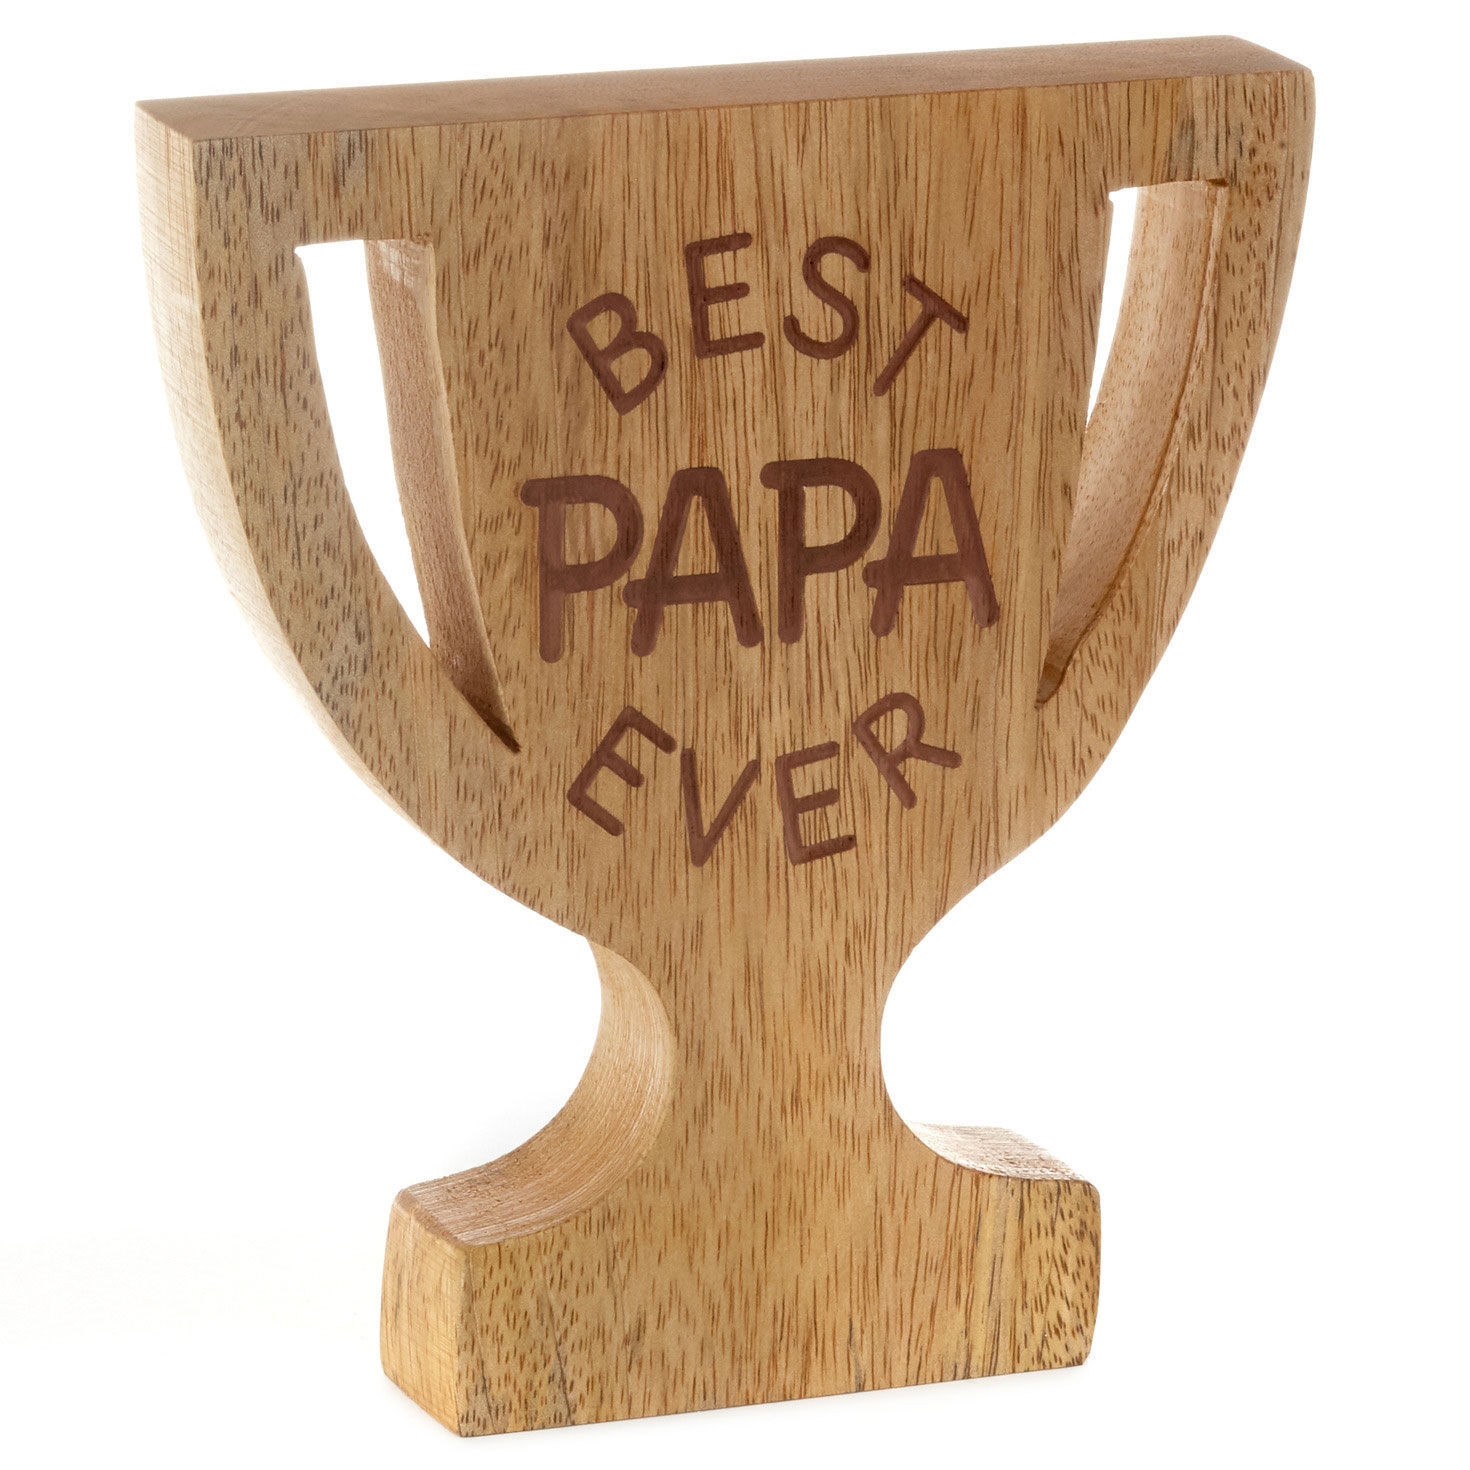 Best Papa Ever Trophy-Shaped Quote Sign, 5.3x6 for only USD 16.99 | Hallmark